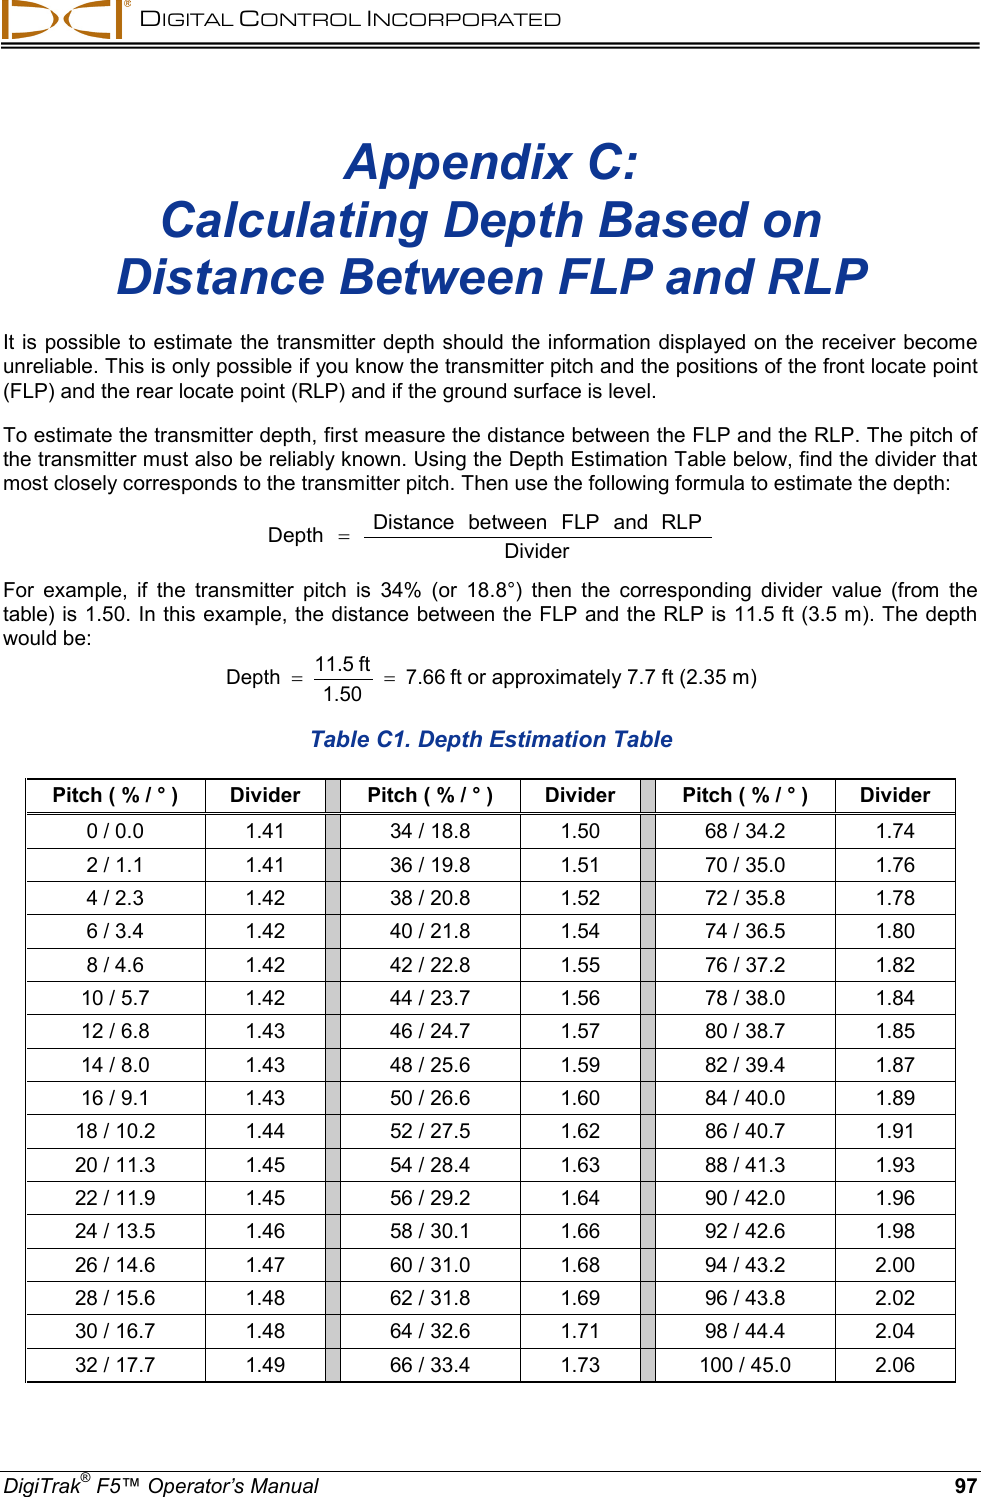  DIGITAL CONTROL INCORPORATED  DigiTrak® F5™ Operator’s Manual 97 Appendix C: Calculating Depth Based on Distance Between FLP and RLP  It is possible to estimate the transmitter depth should the information displayed on the receiver become unreliable. This is only possible if you know the transmitter pitch and the positions of the front locate point (FLP) and the rear locate point (RLP) and if the ground surface is level.  To estimate the transmitter depth, first measure the distance between the FLP and the RLP. The pitch of the transmitter must also be reliably known. Using the Depth Estimation Table below, find the divider that most closely corresponds to the transmitter pitch. Then use the following formula to estimate the depth: DividerRLPandFLPbetweenDistanceDepth = For example, if the transmitter pitch is 34% (or 18.8°) then the corresponding divider value (from the table) is 1.50. In this example, the distance between the FLP and the RLP is 11.5 ft (3.5 m). The depth would be: 7.661.50ft 11.5Depth ==ft or approximately 7.7 ft (2.35 m)  Table C1. Depth Estimation Table Pitch ( % / ° ) Divider    Pitch ( % / ° ) Divider    Pitch ( % / ° ) Divider 0 / 0.0 1.41    34 / 18.8 1.50    68 / 34.2 1.74 2 / 1.1 1.41    36 / 19.8 1.51    70 / 35.0 1.76 4 / 2.3 1.42    38 / 20.8 1.52    72 / 35.8 1.78 6 / 3.4 1.42    40 / 21.8 1.54    74 / 36.5 1.80 8 / 4.6 1.42    42 / 22.8 1.55    76 / 37.2 1.82 10 / 5.7 1.42    44 / 23.7 1.56    78 / 38.0 1.84 12 / 6.8 1.43    46 / 24.7 1.57    80 / 38.7 1.85 14 / 8.0 1.43    48 / 25.6 1.59    82 / 39.4 1.87 16 / 9.1 1.43    50 / 26.6 1.60    84 / 40.0 1.89 18 / 10.2 1.44    52 / 27.5 1.62    86 / 40.7 1.91 20 / 11.3 1.45    54 / 28.4 1.63    88 / 41.3 1.93 22 / 11.9 1.45    56 / 29.2 1.64    90 / 42.0 1.96 24 / 13.5 1.46    58 / 30.1 1.66    92 / 42.6 1.98 26 / 14.6 1.47    60 / 31.0 1.68    94 / 43.2 2.00 28 / 15.6 1.48    62 / 31.8 1.69    96 / 43.8 2.02 30 / 16.7 1.48    64 / 32.6 1.71    98 / 44.4 2.04 32 / 17.7 1.49    66 / 33.4 1.73    100 / 45.0 2.06  